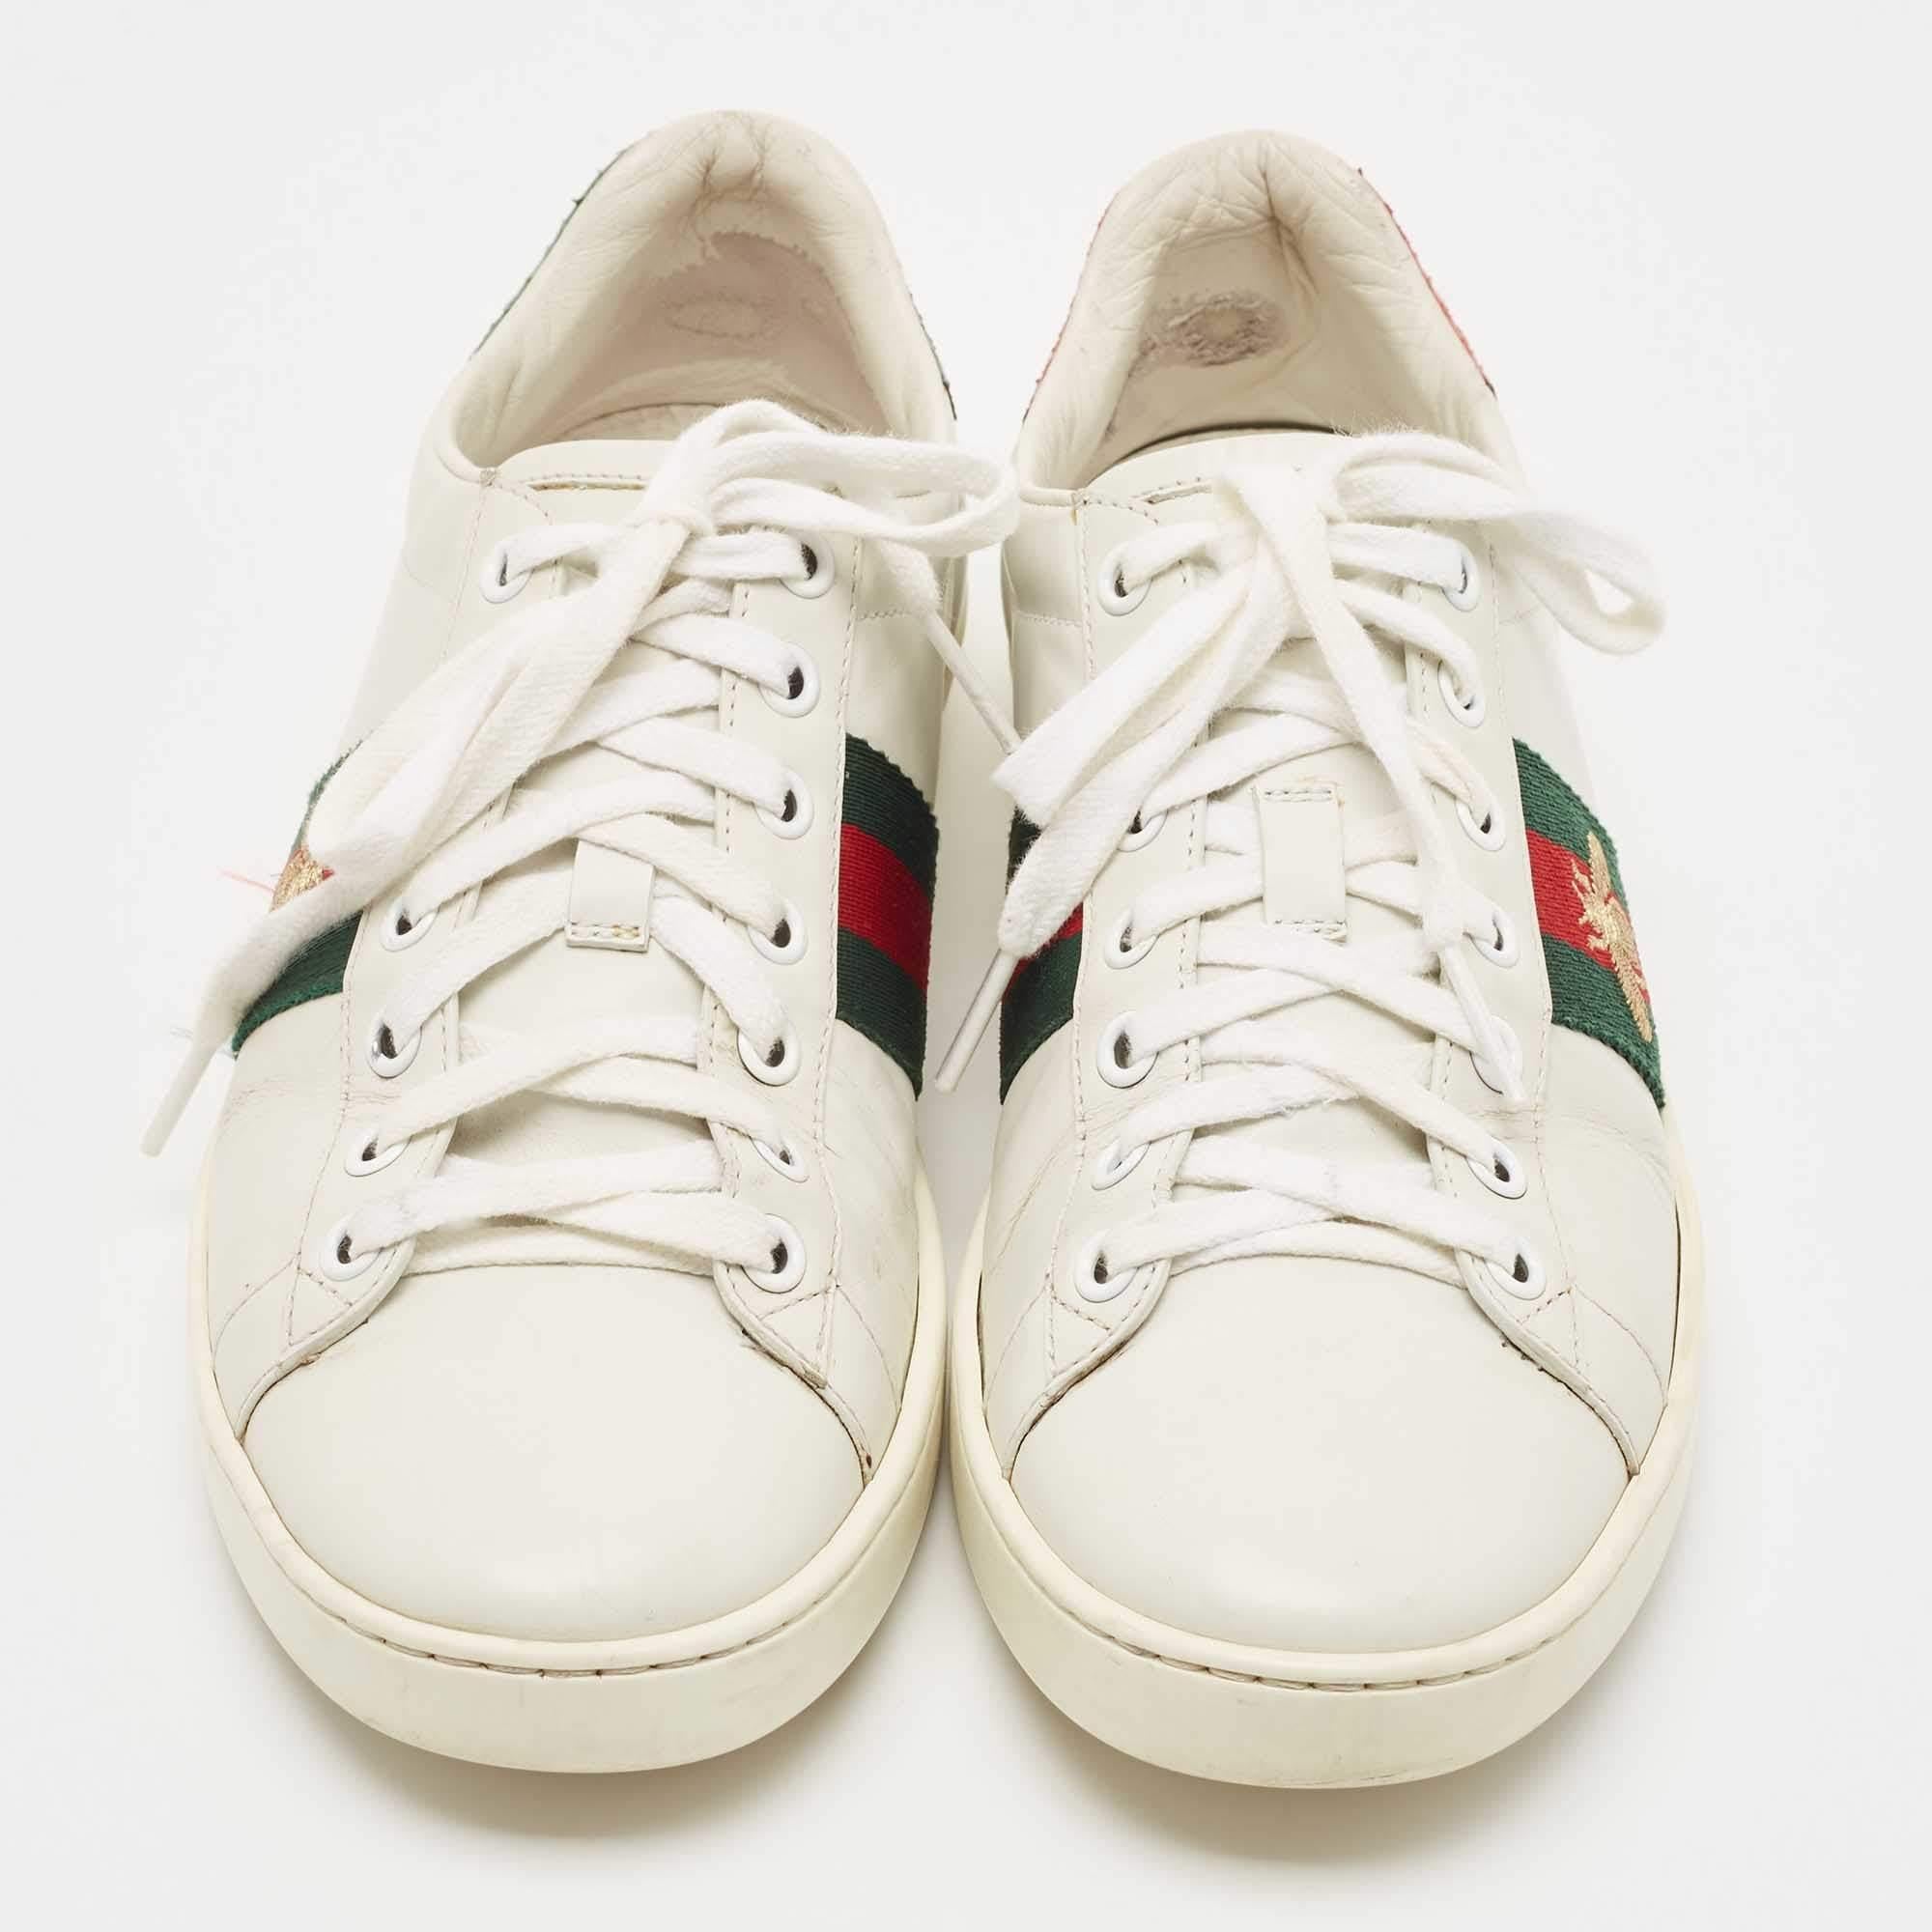 Stacked with signature details, this Gucci pair is rendered in leather and is designed with lace-up vamps, rubber soles, and the iconic bee motif on Web stripe. The visual display of this pair is enhanced with contrasting color trims carrying the